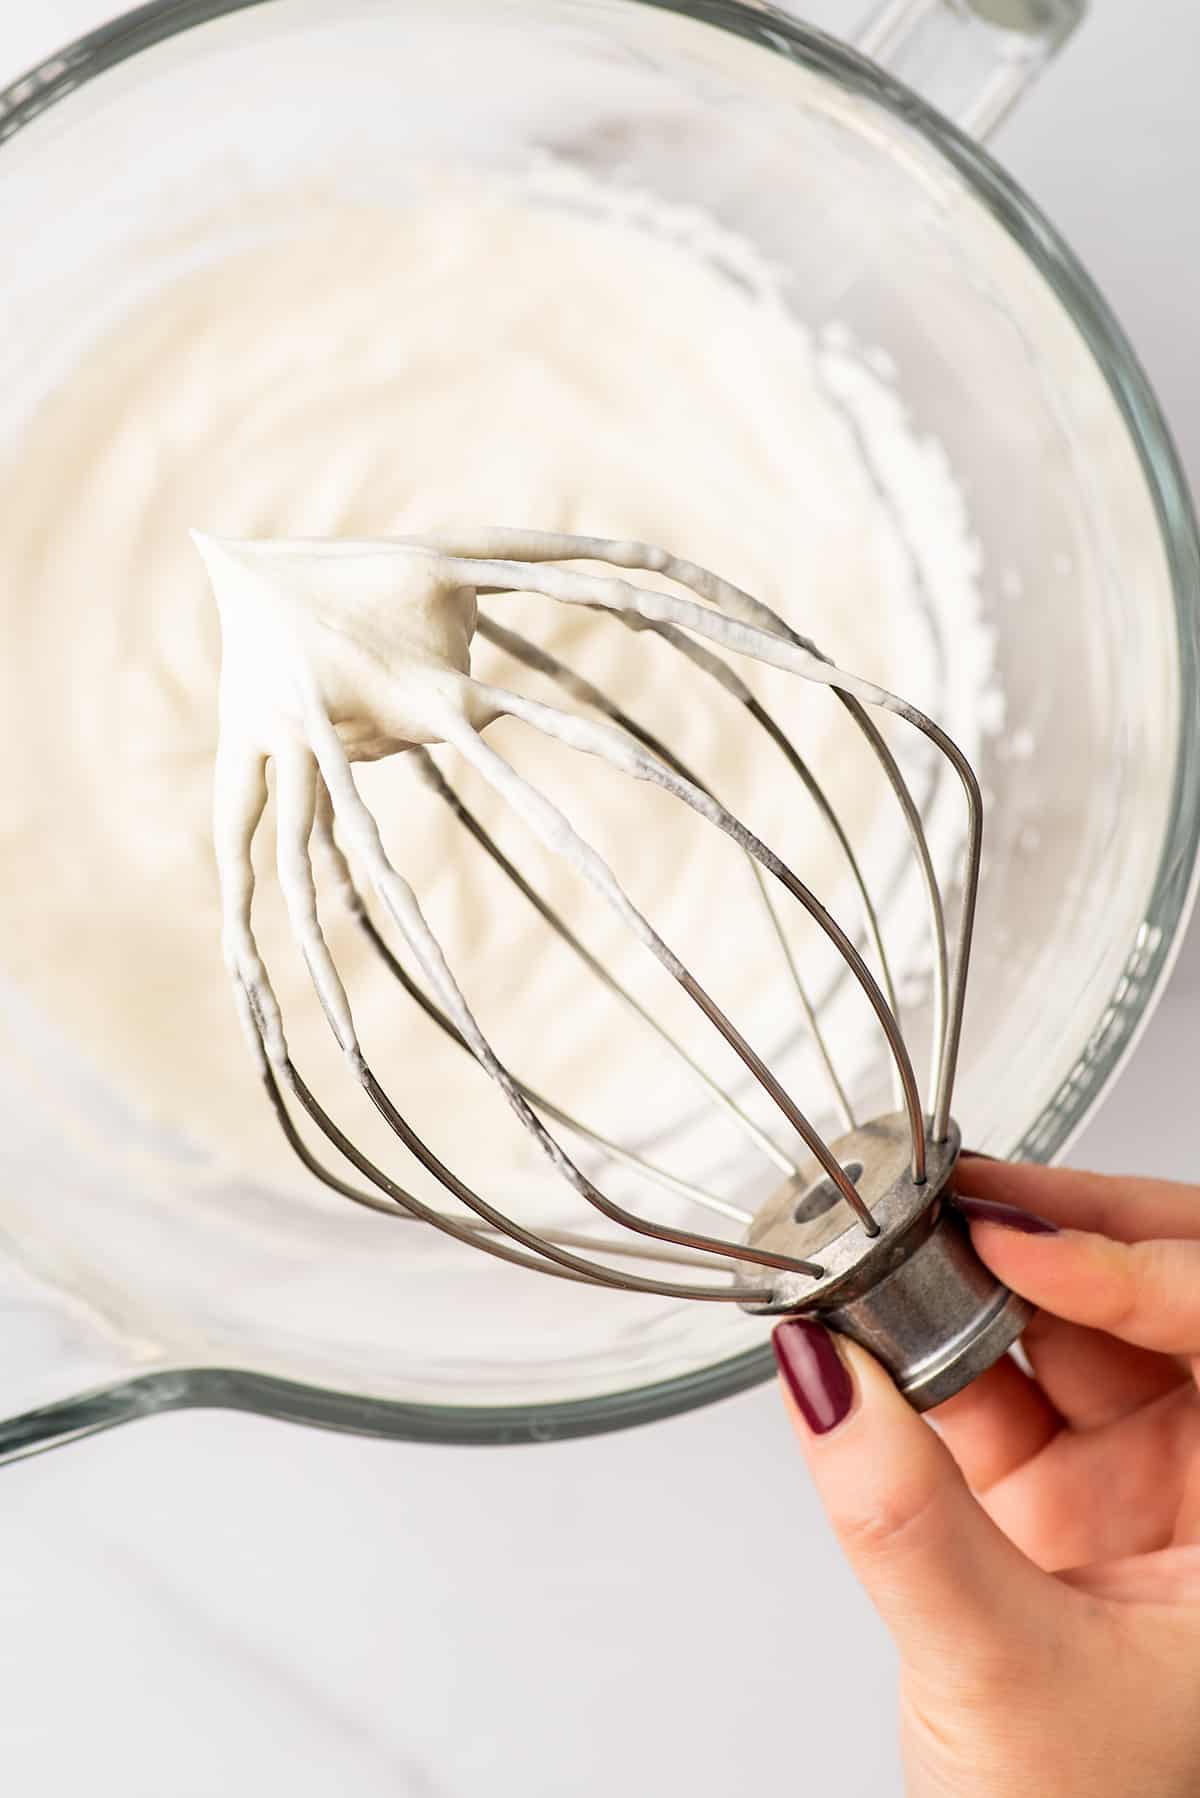 Mixing By Hand - Whipped Cream Topping - My Own Sweet Thyme